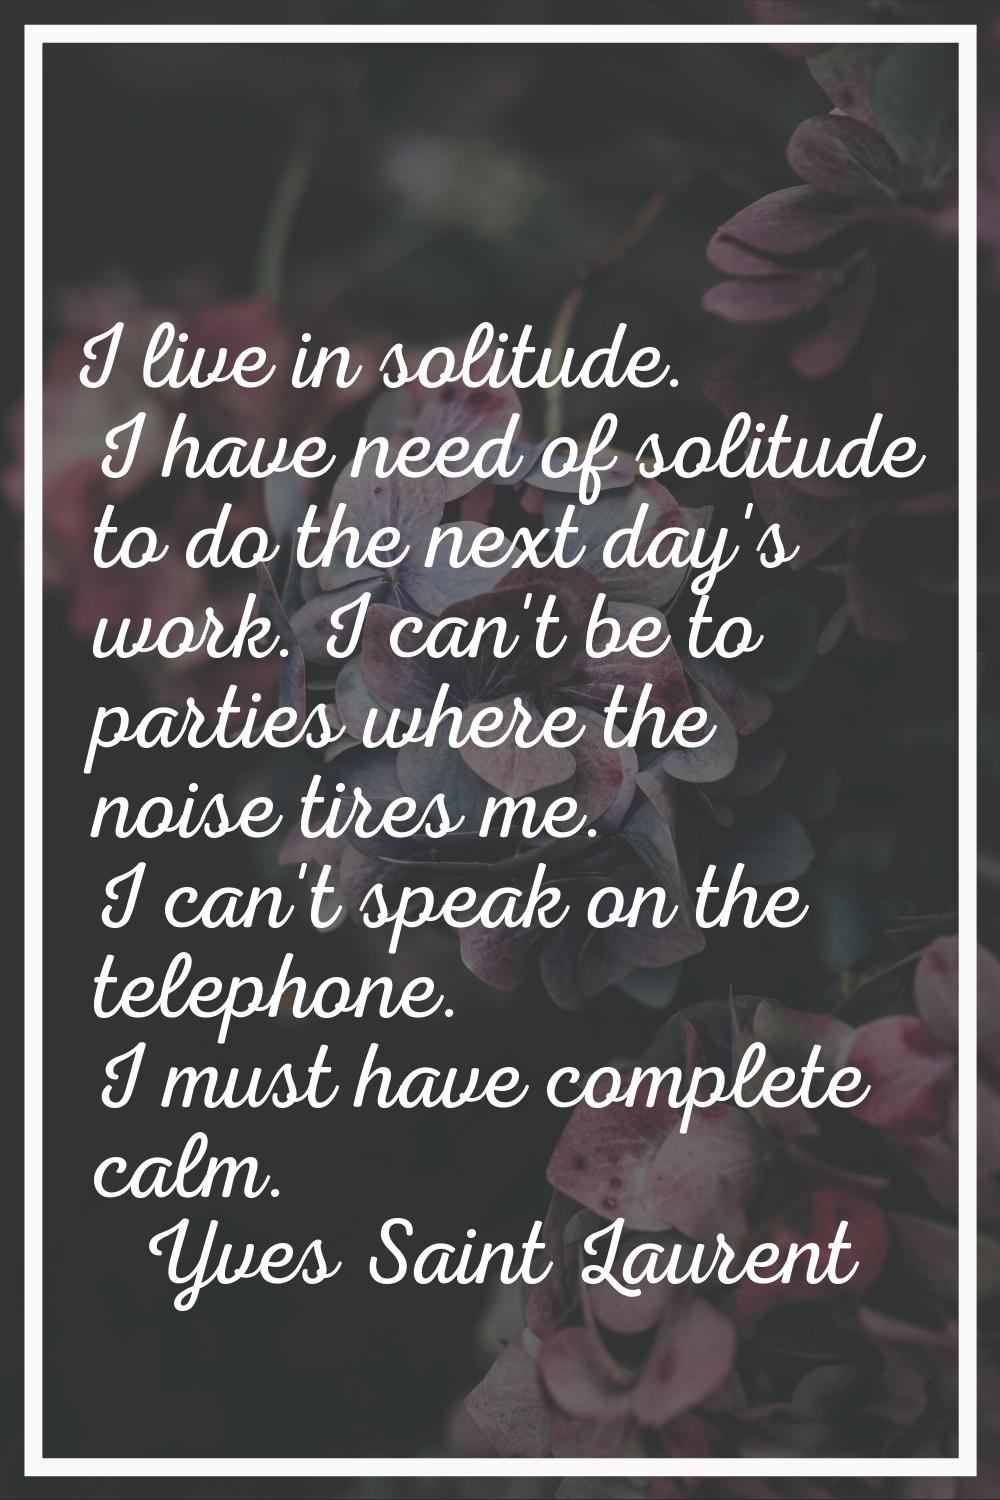 I live in solitude. I have need of solitude to do the next day's work. I can't be to parties where 